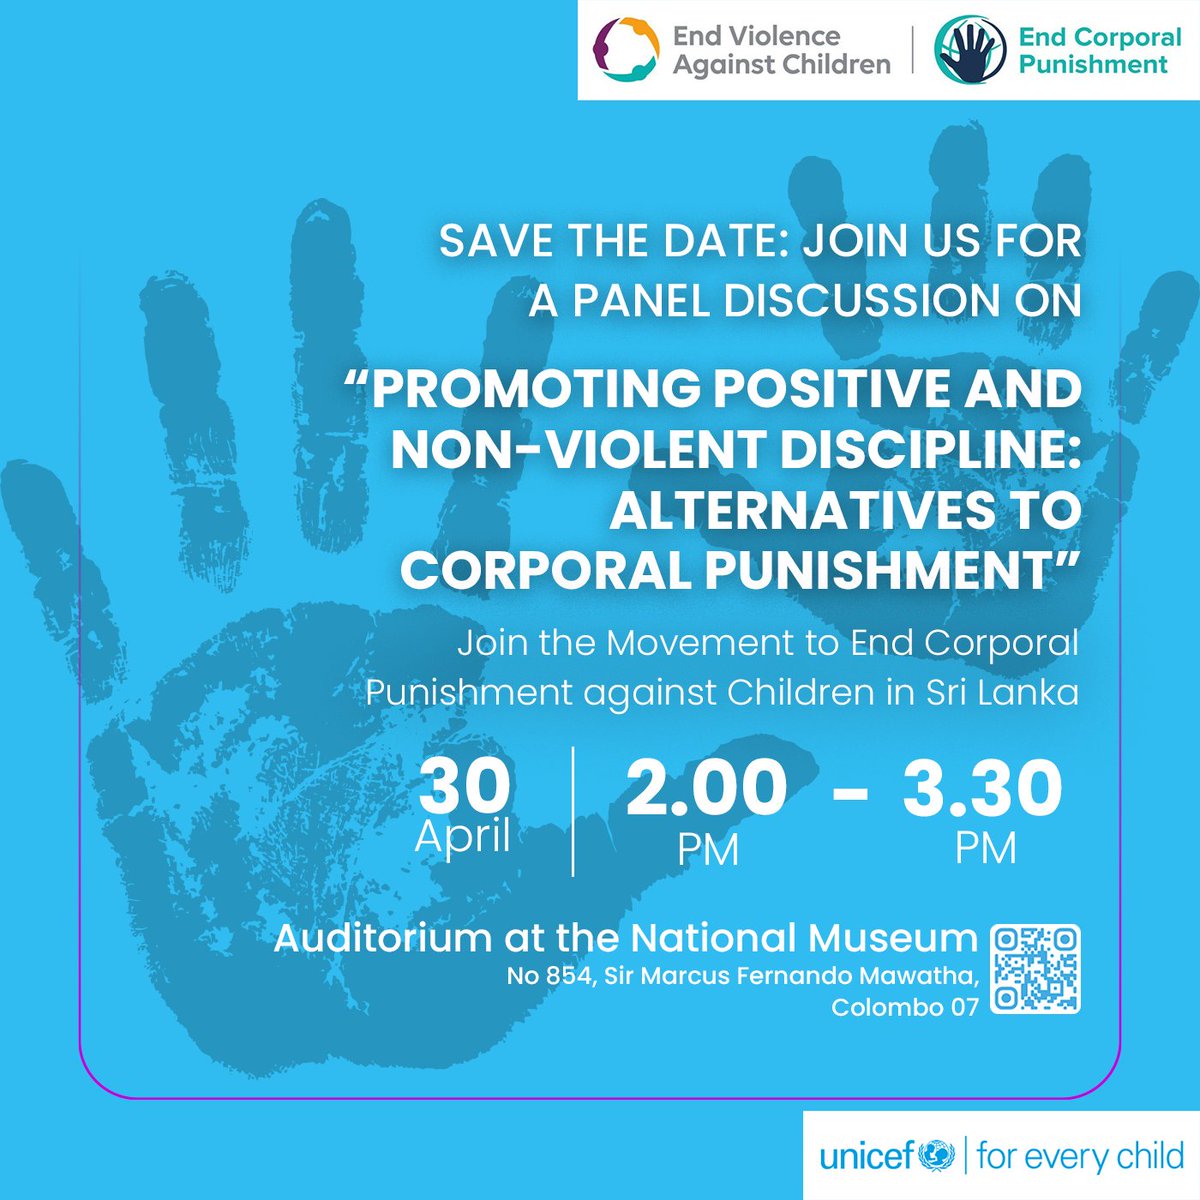 Save the date: April 30th, 2024! Join us as we mark the International Day to End Corporal Punishment, advocating for children's rights and promoting positive discipline. #EndCorporalPunishment